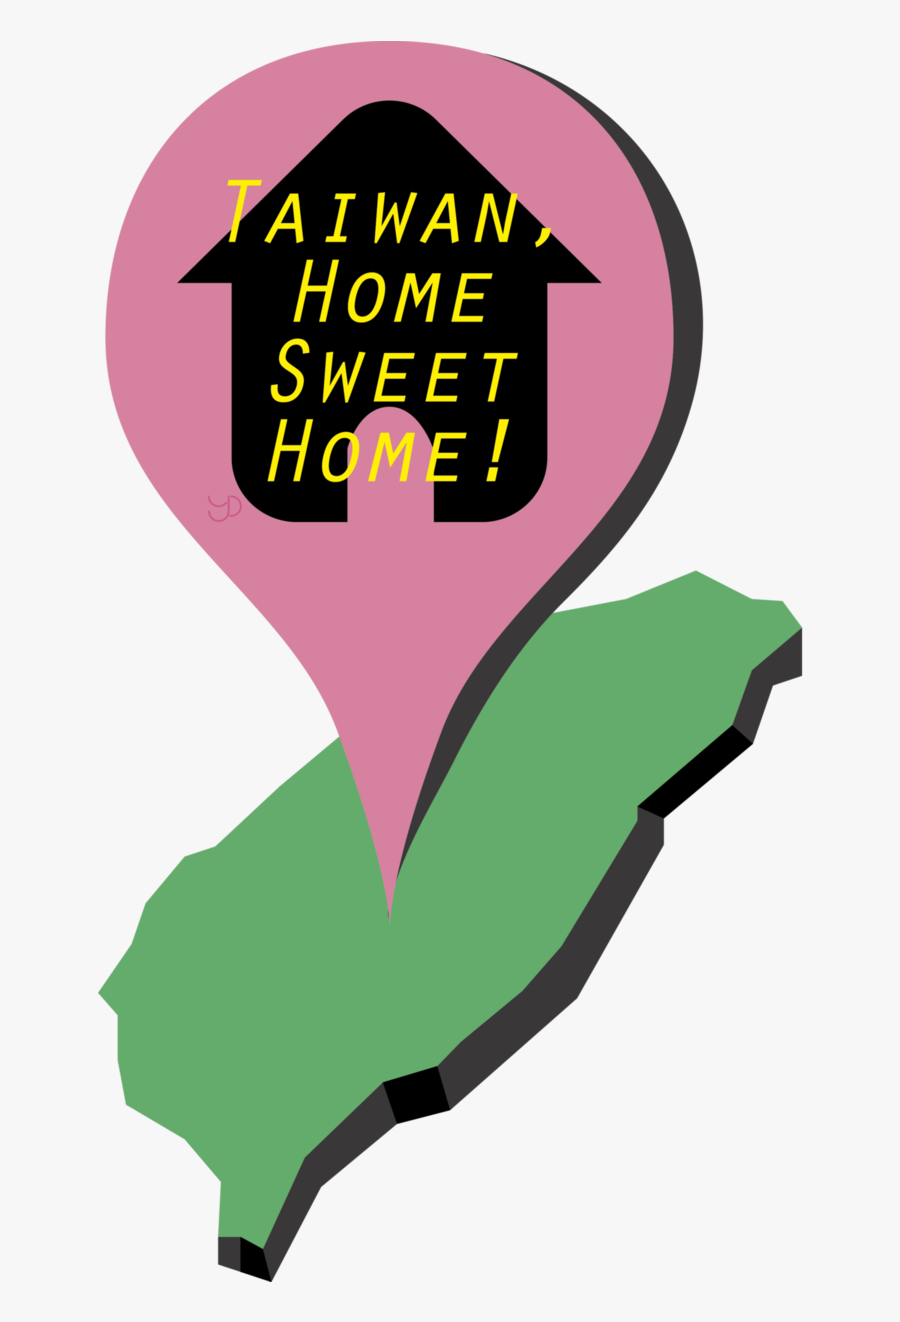 Taiwan, Home Sweet Home - Poster, Transparent Clipart